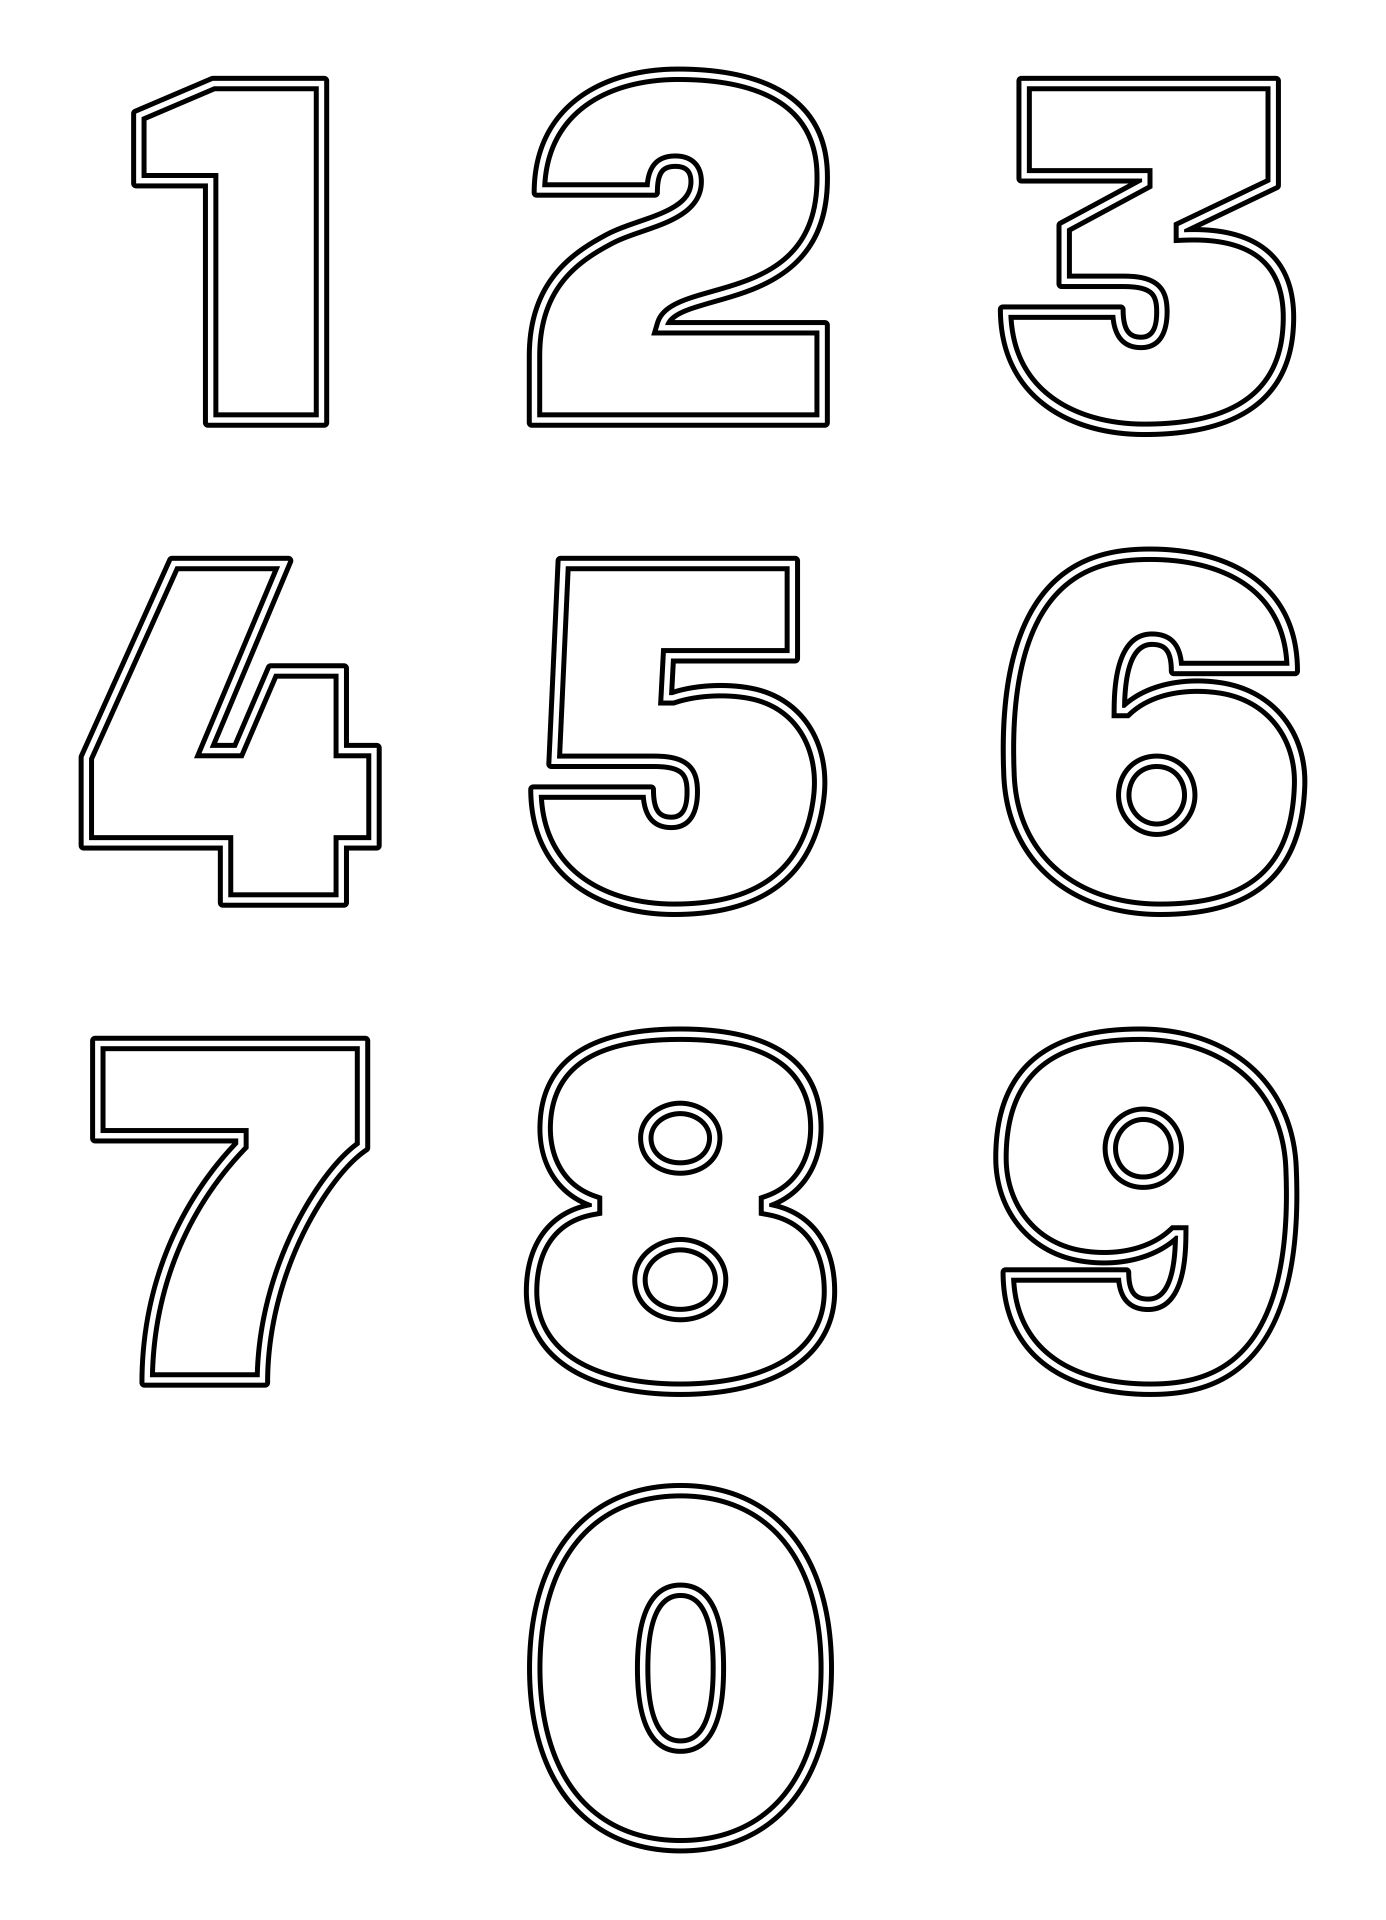 4 Best Images of Printable Number Outlines - Printable Bubble Number 2 ...